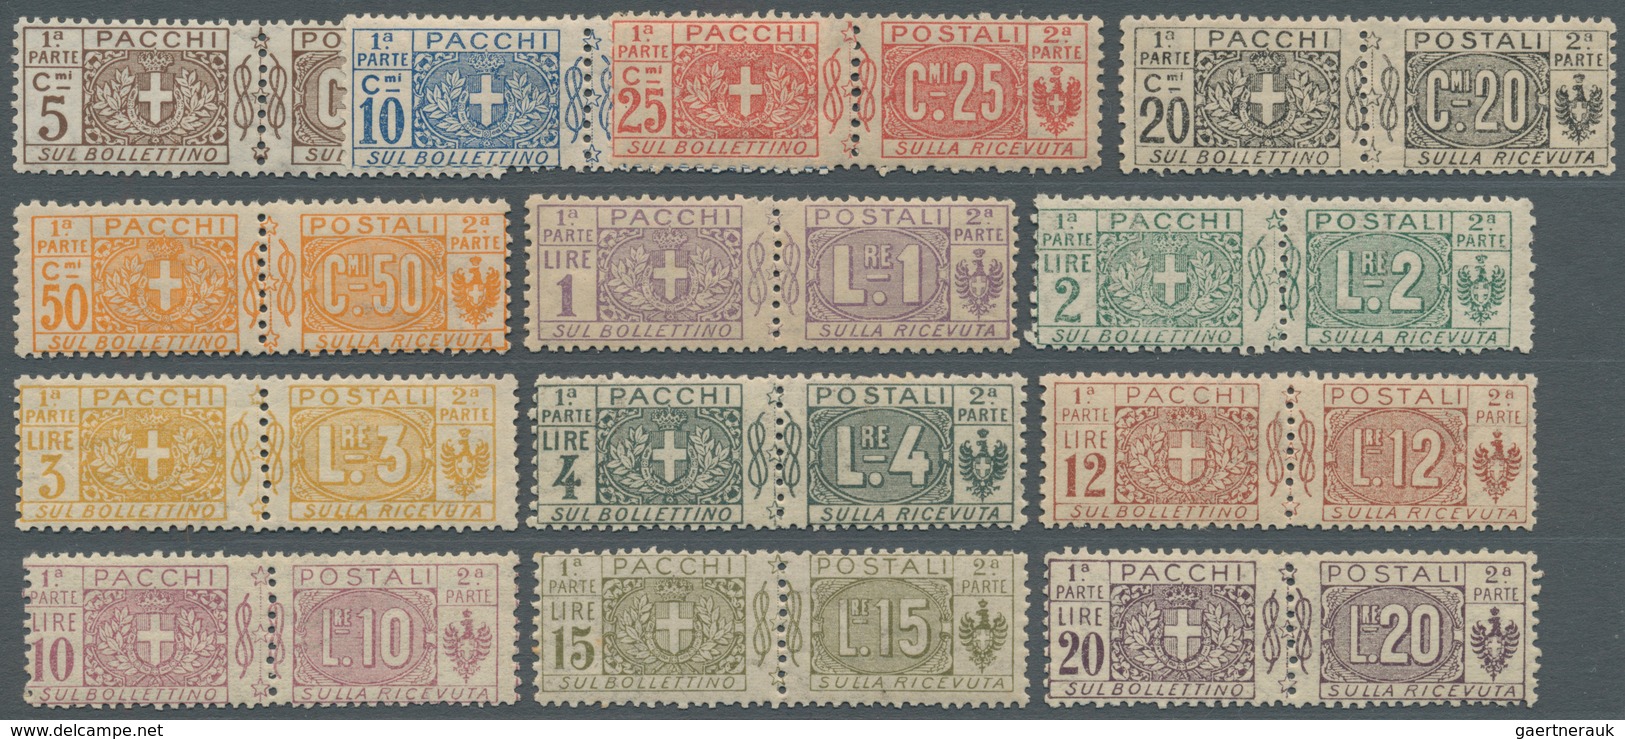 Italien - Paketmarken: 1914, Pacchi Postali Complete Set Of 13 Values All Mint Never Hinged, Very Fi - Postal Parcels